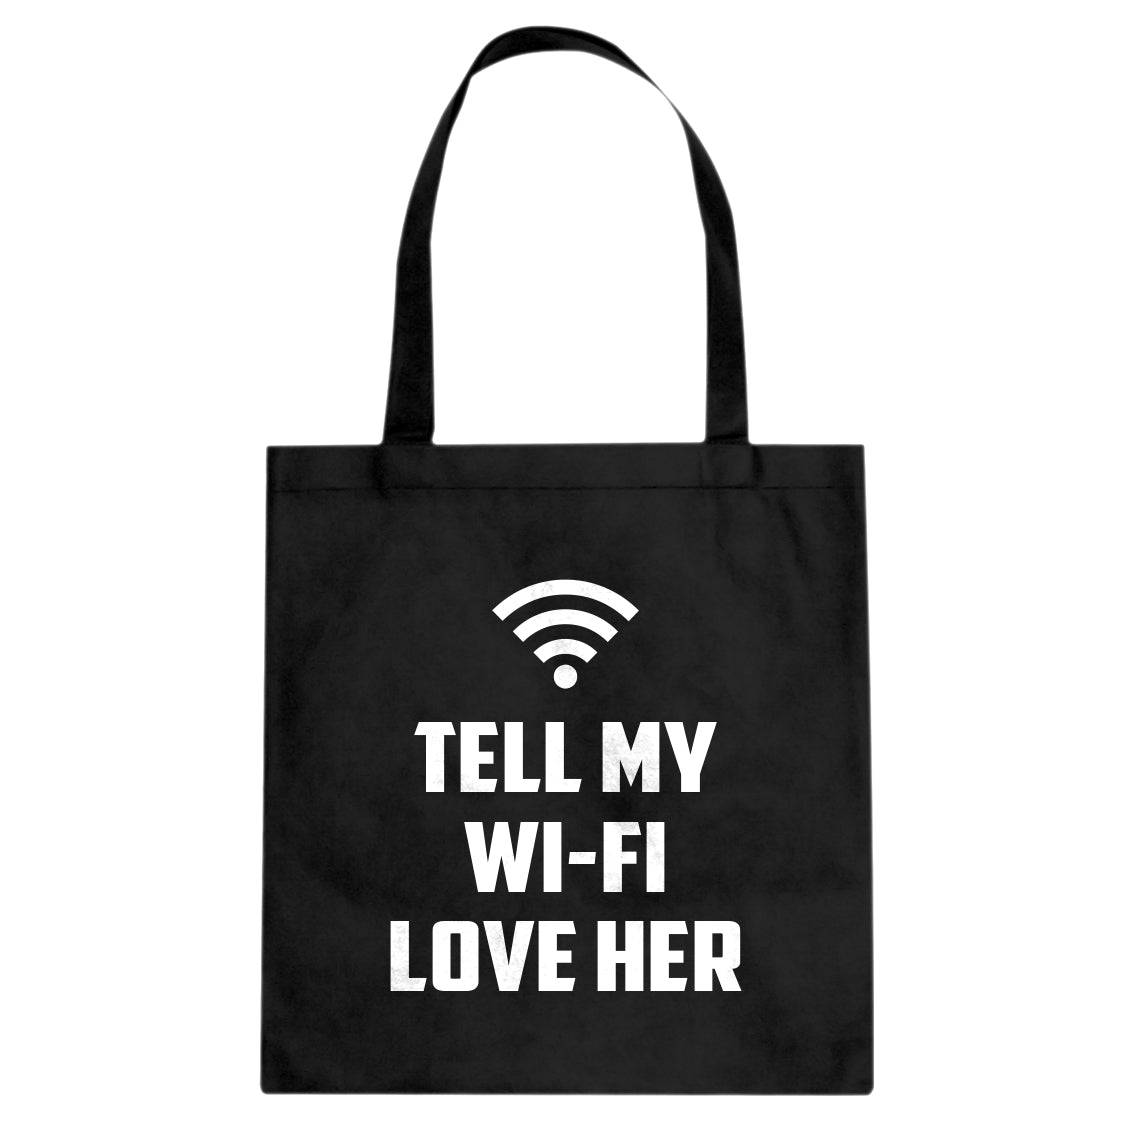 Tell My WI-FI Love Her Cotton Canvas Tote Bag